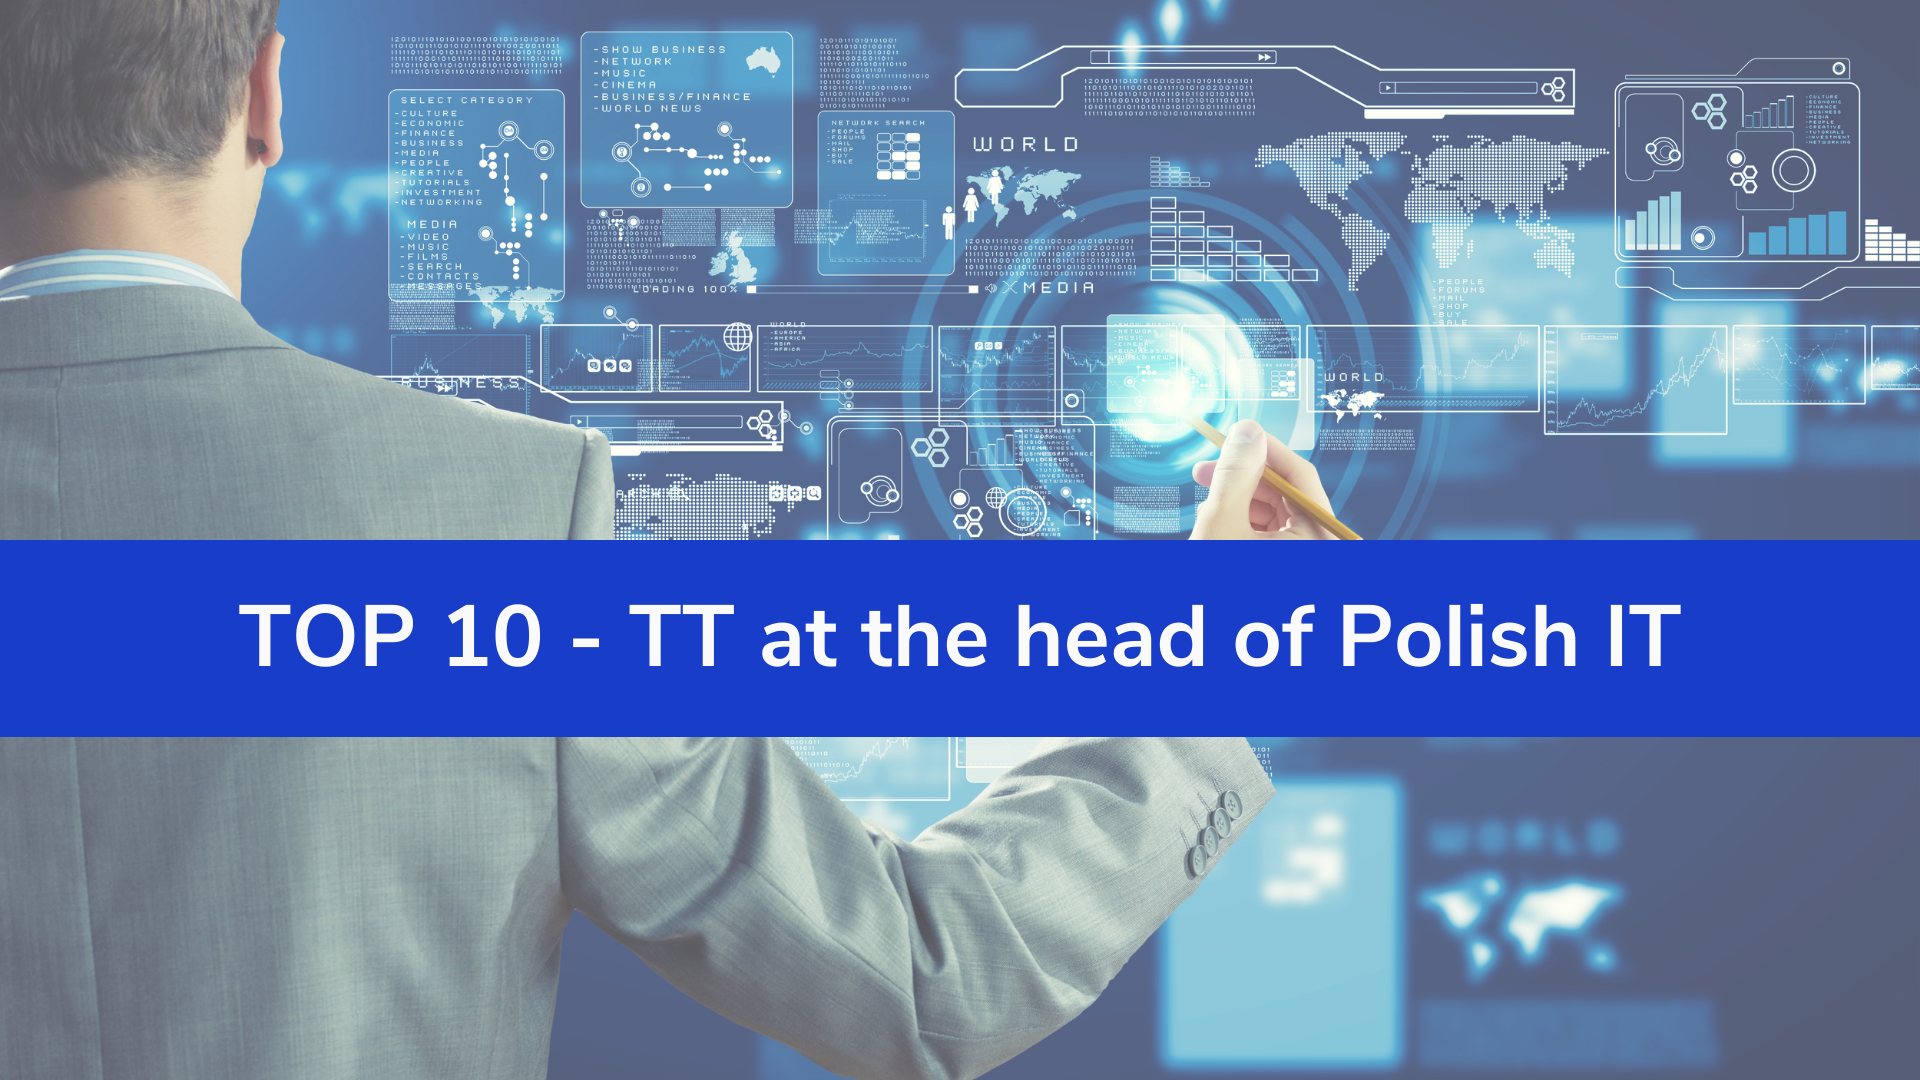 Transition Technologies at the head of Polish IT